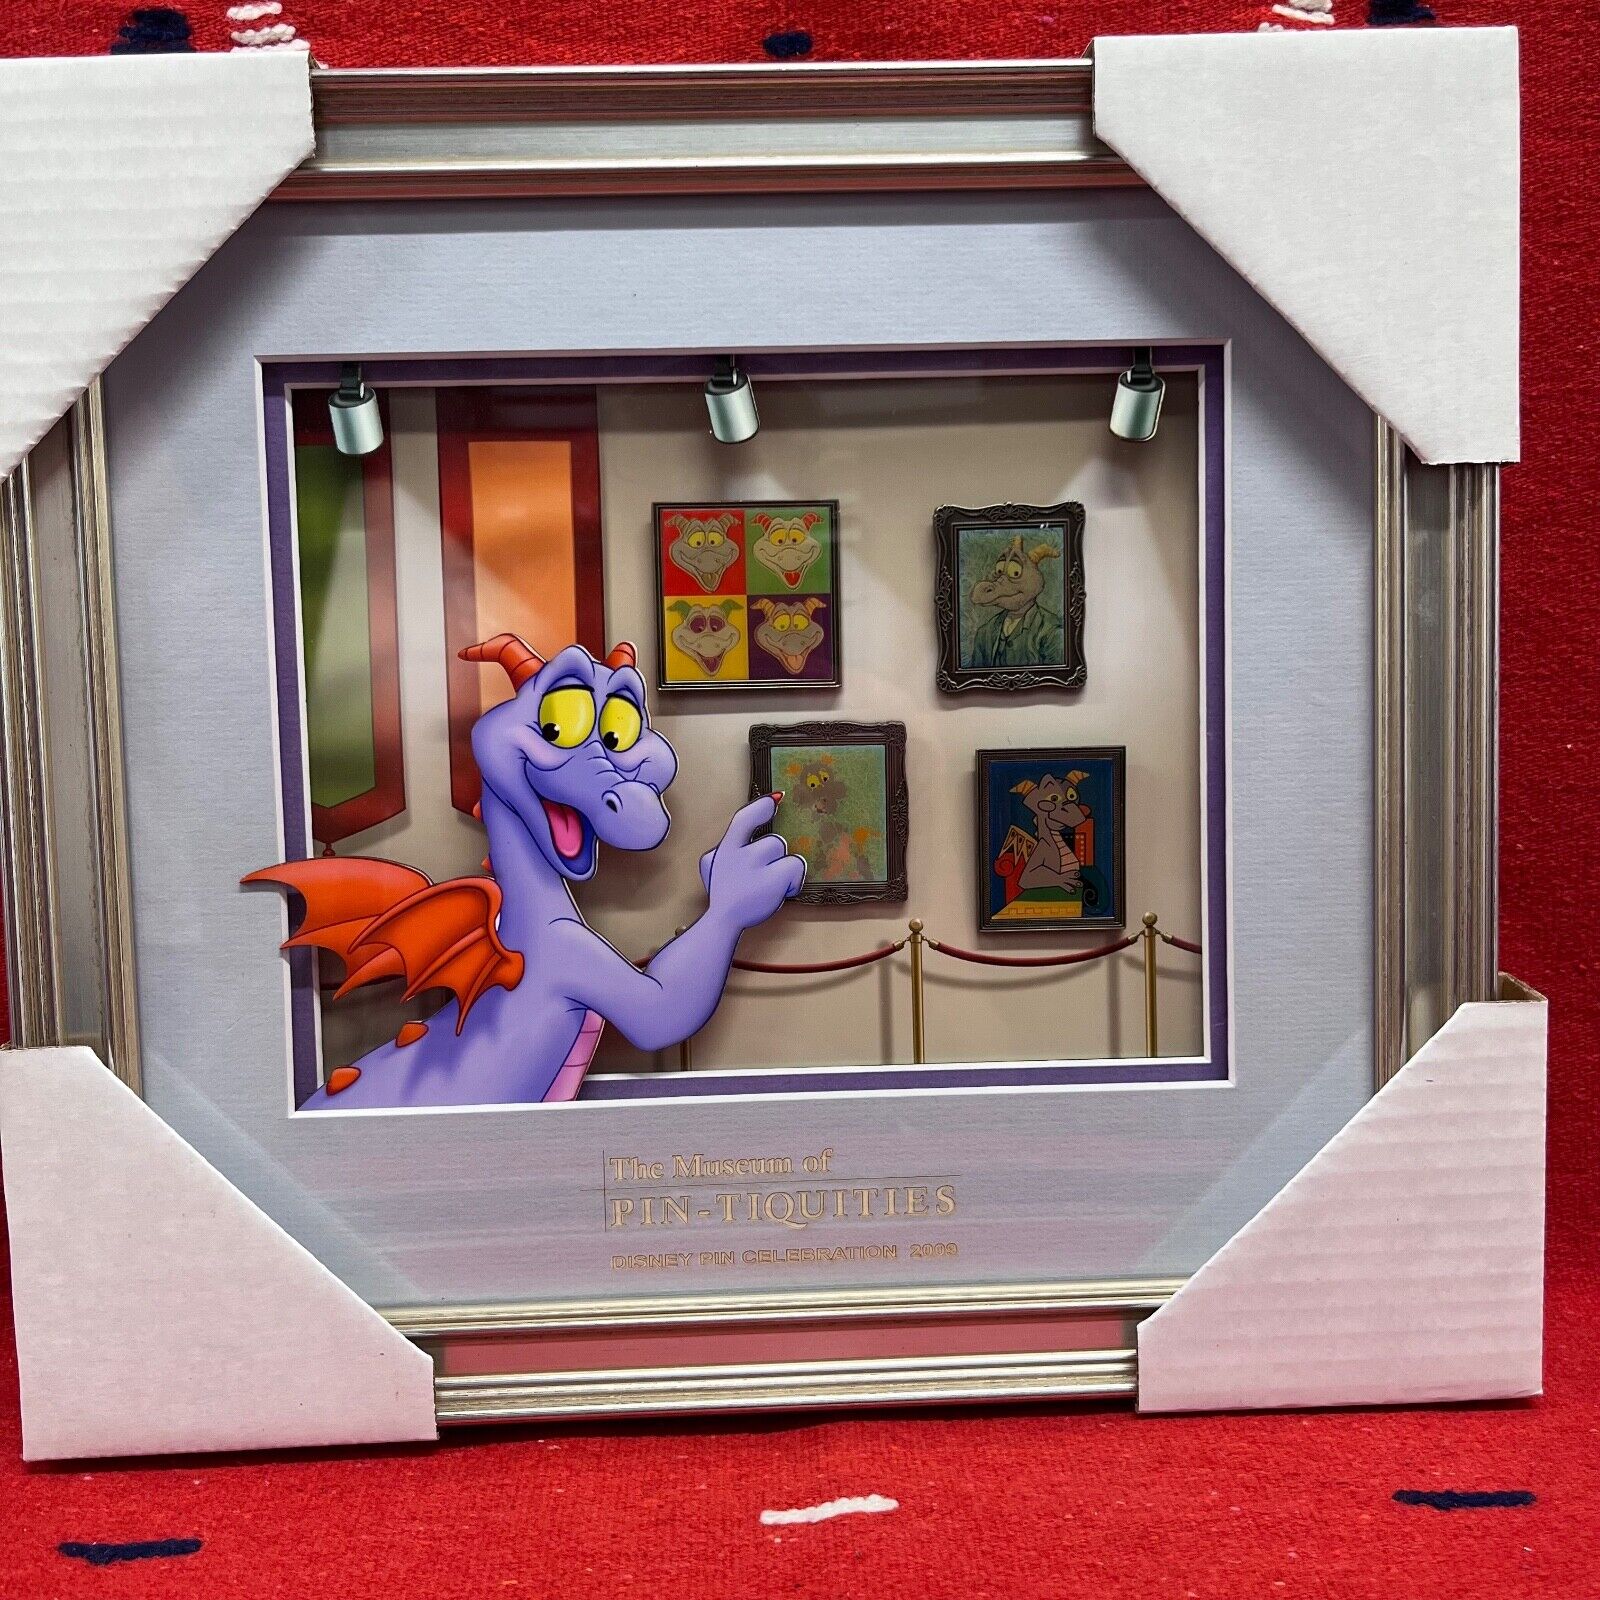 Disney WDW Museum of Pin-tiquities Figment Gallery 4 Pin Frame Set LE 150